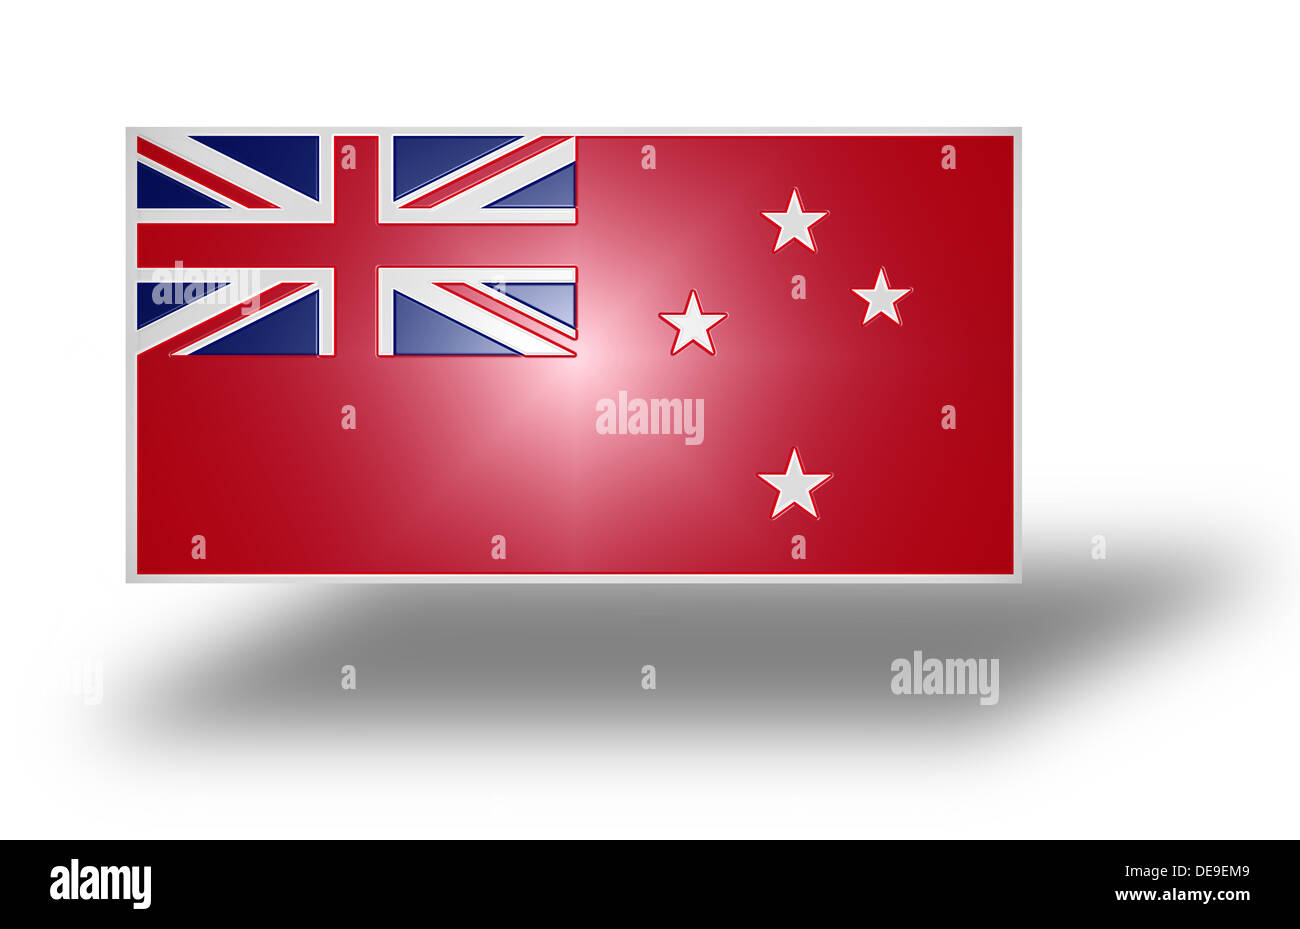 Civil ensign of New Zealand (Red Ensign). Stylized I. Stock Photo